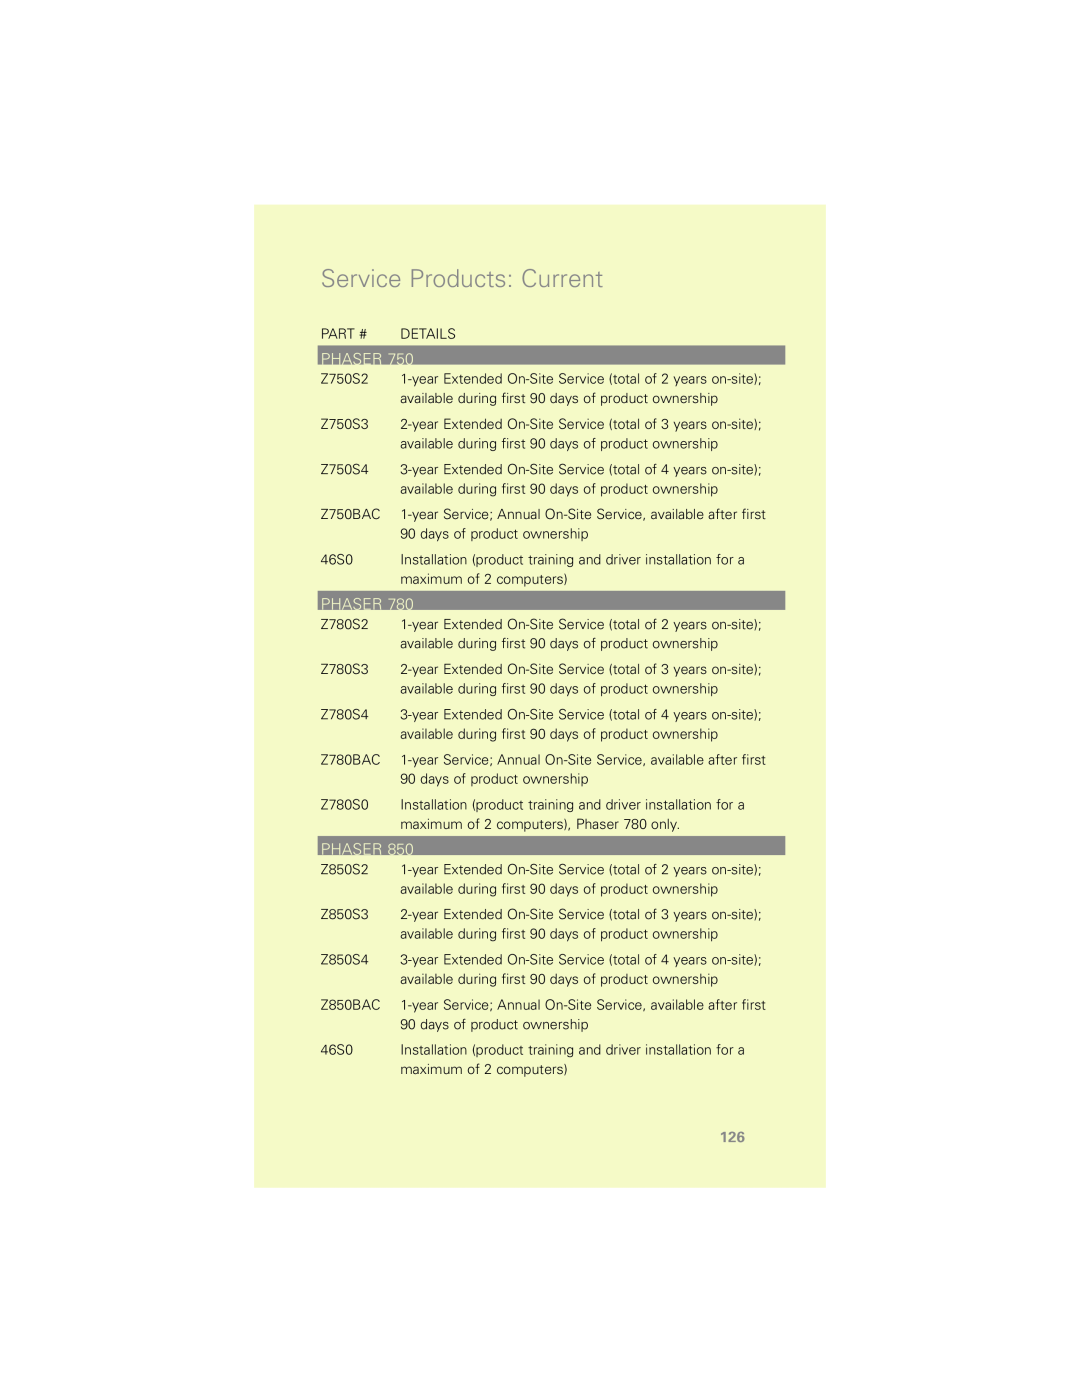 Xerox N Series manual Service Products Current, Phaser 